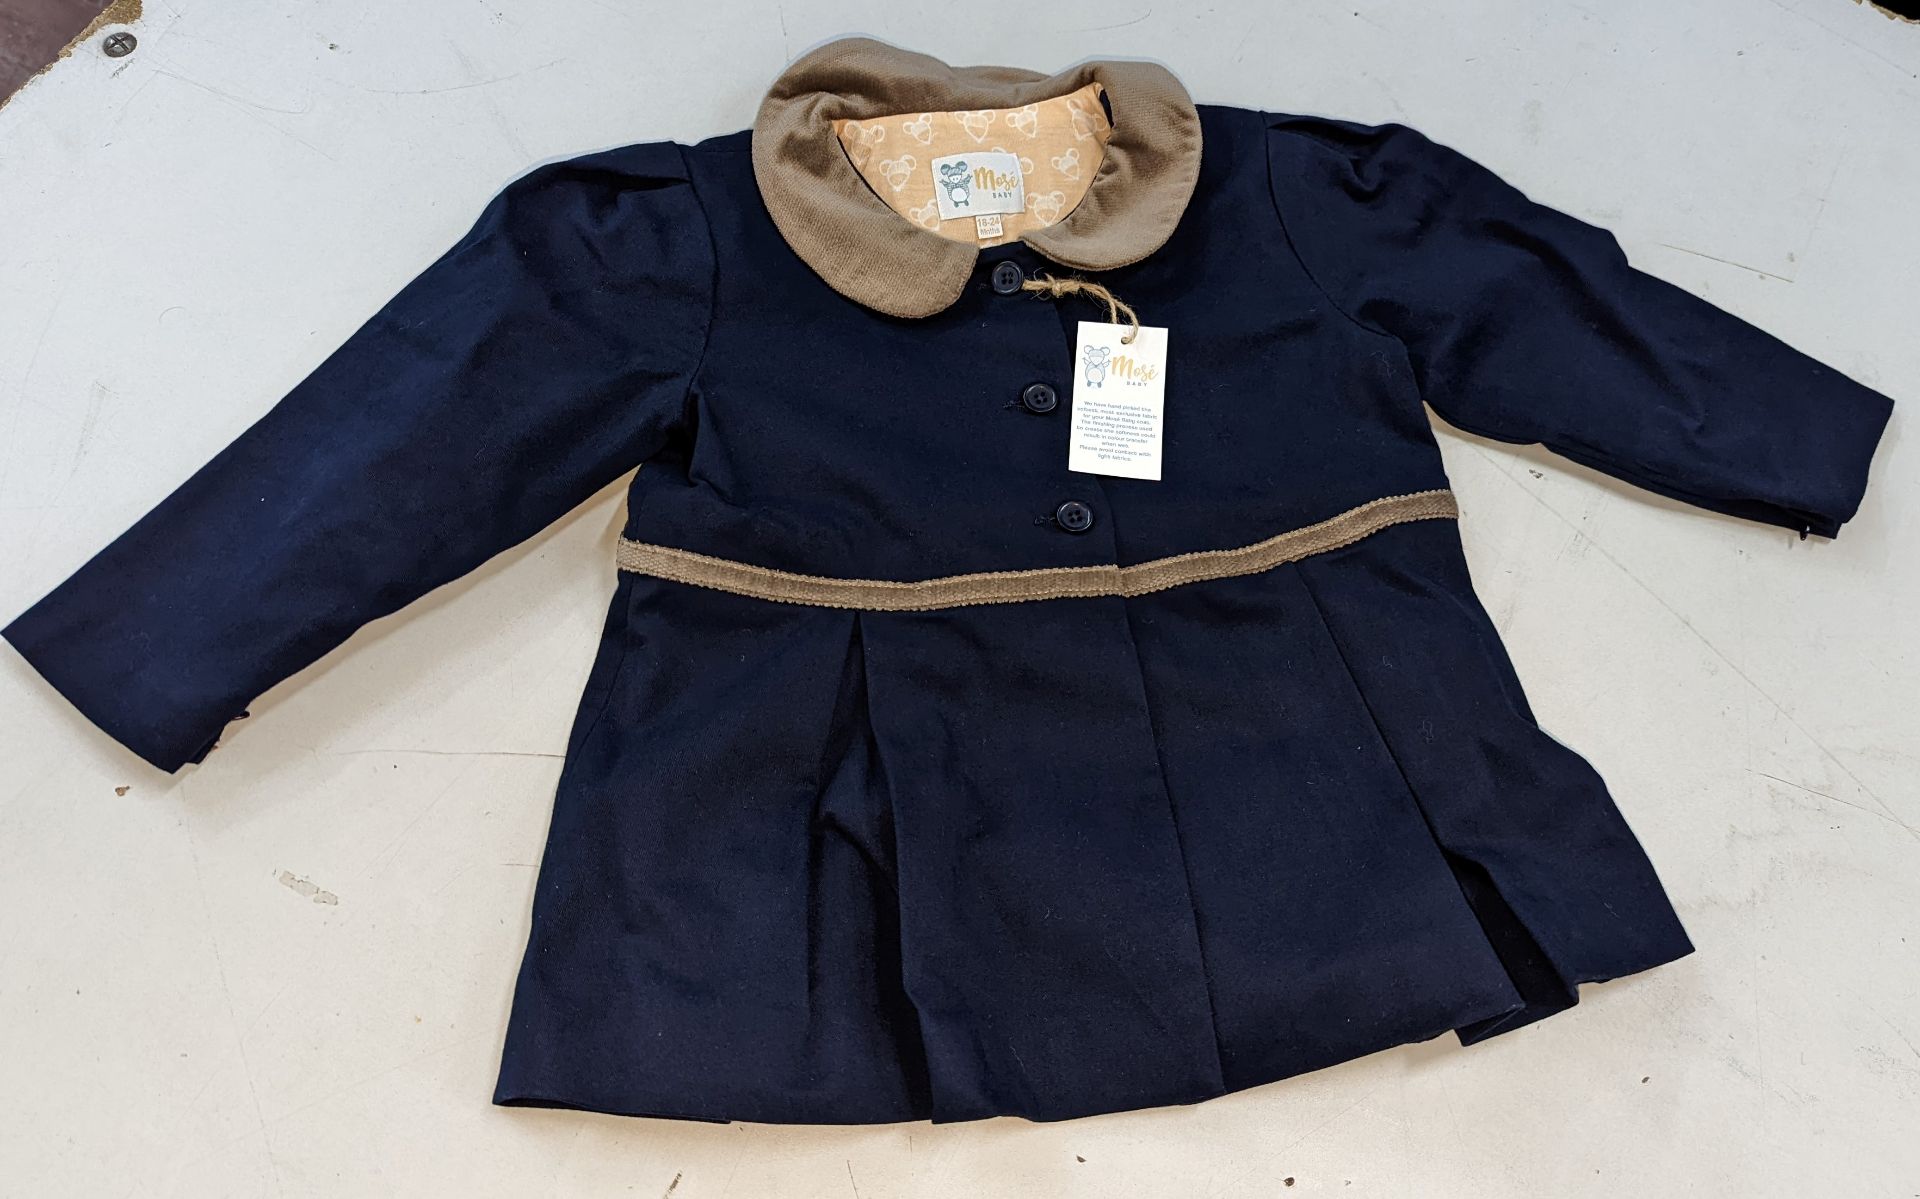 20 off Mosé Baby girl's dress coats in navy, with skirted design, velvet collar and waist trim plus - Image 8 of 11